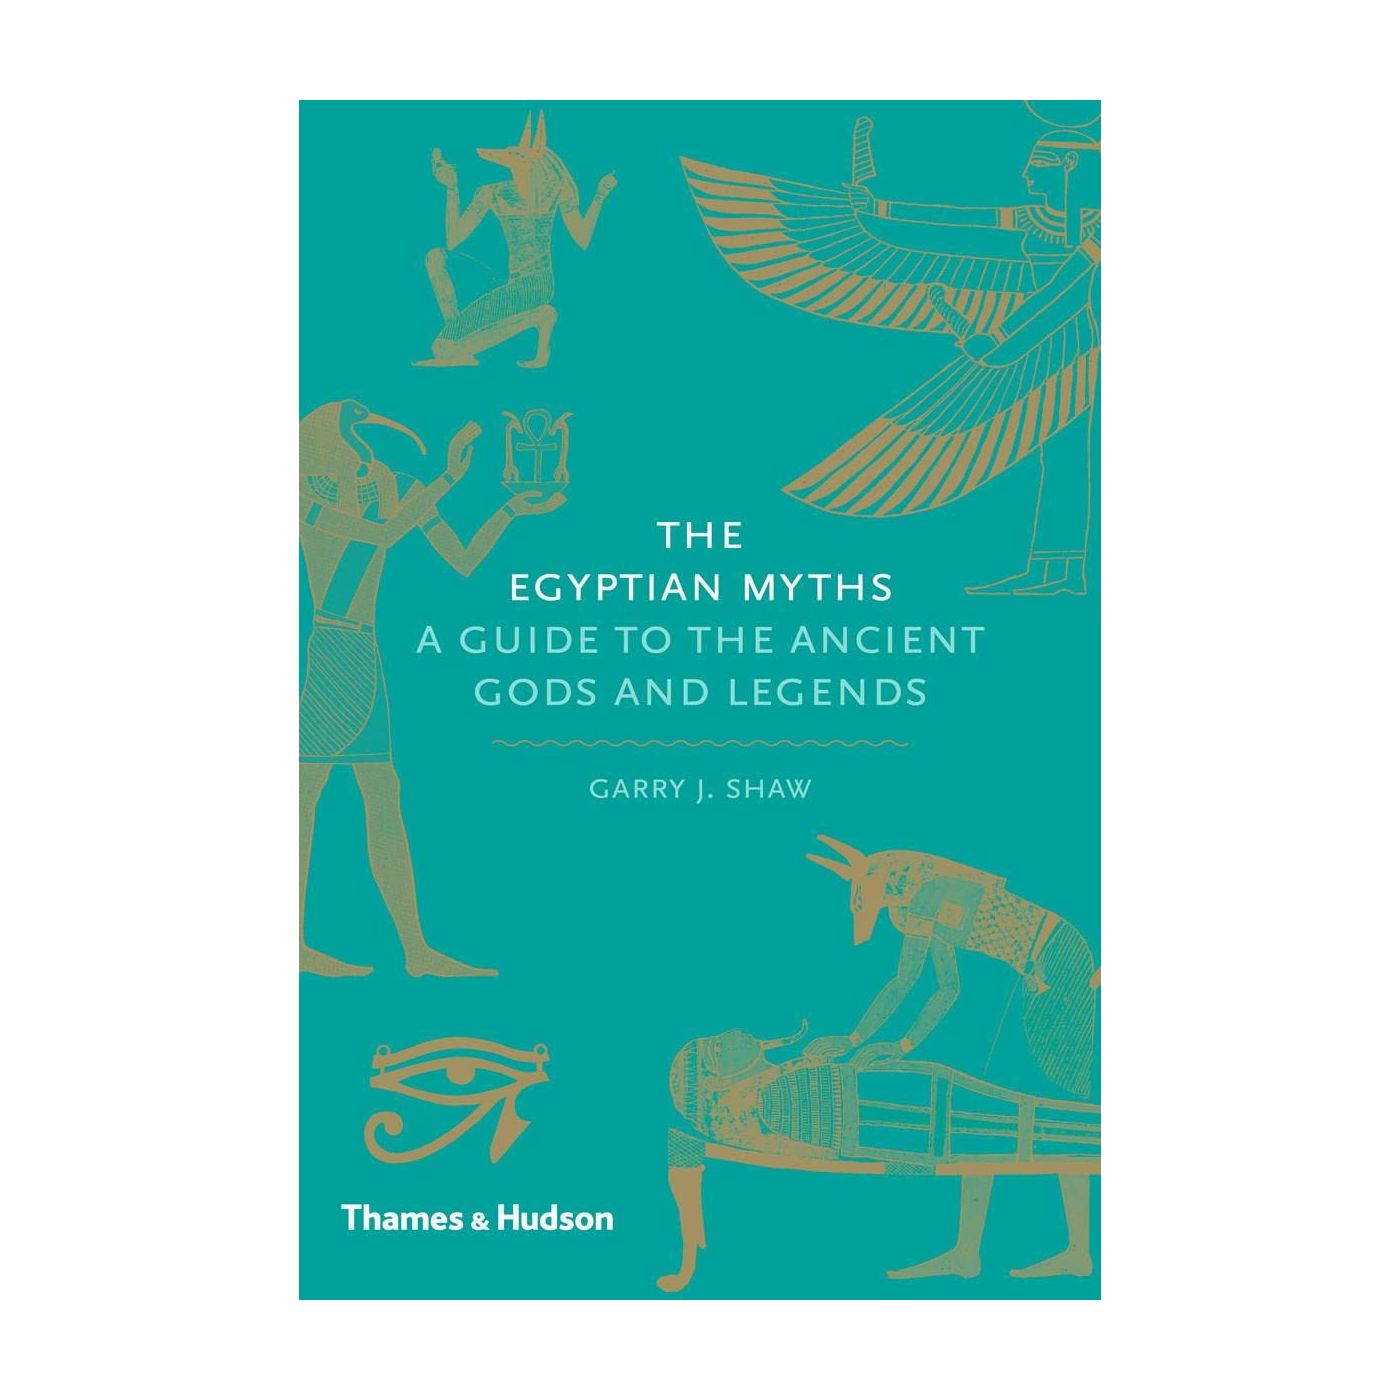 The Egyptians Myths: a Guide to the Ancient Gods and Legends